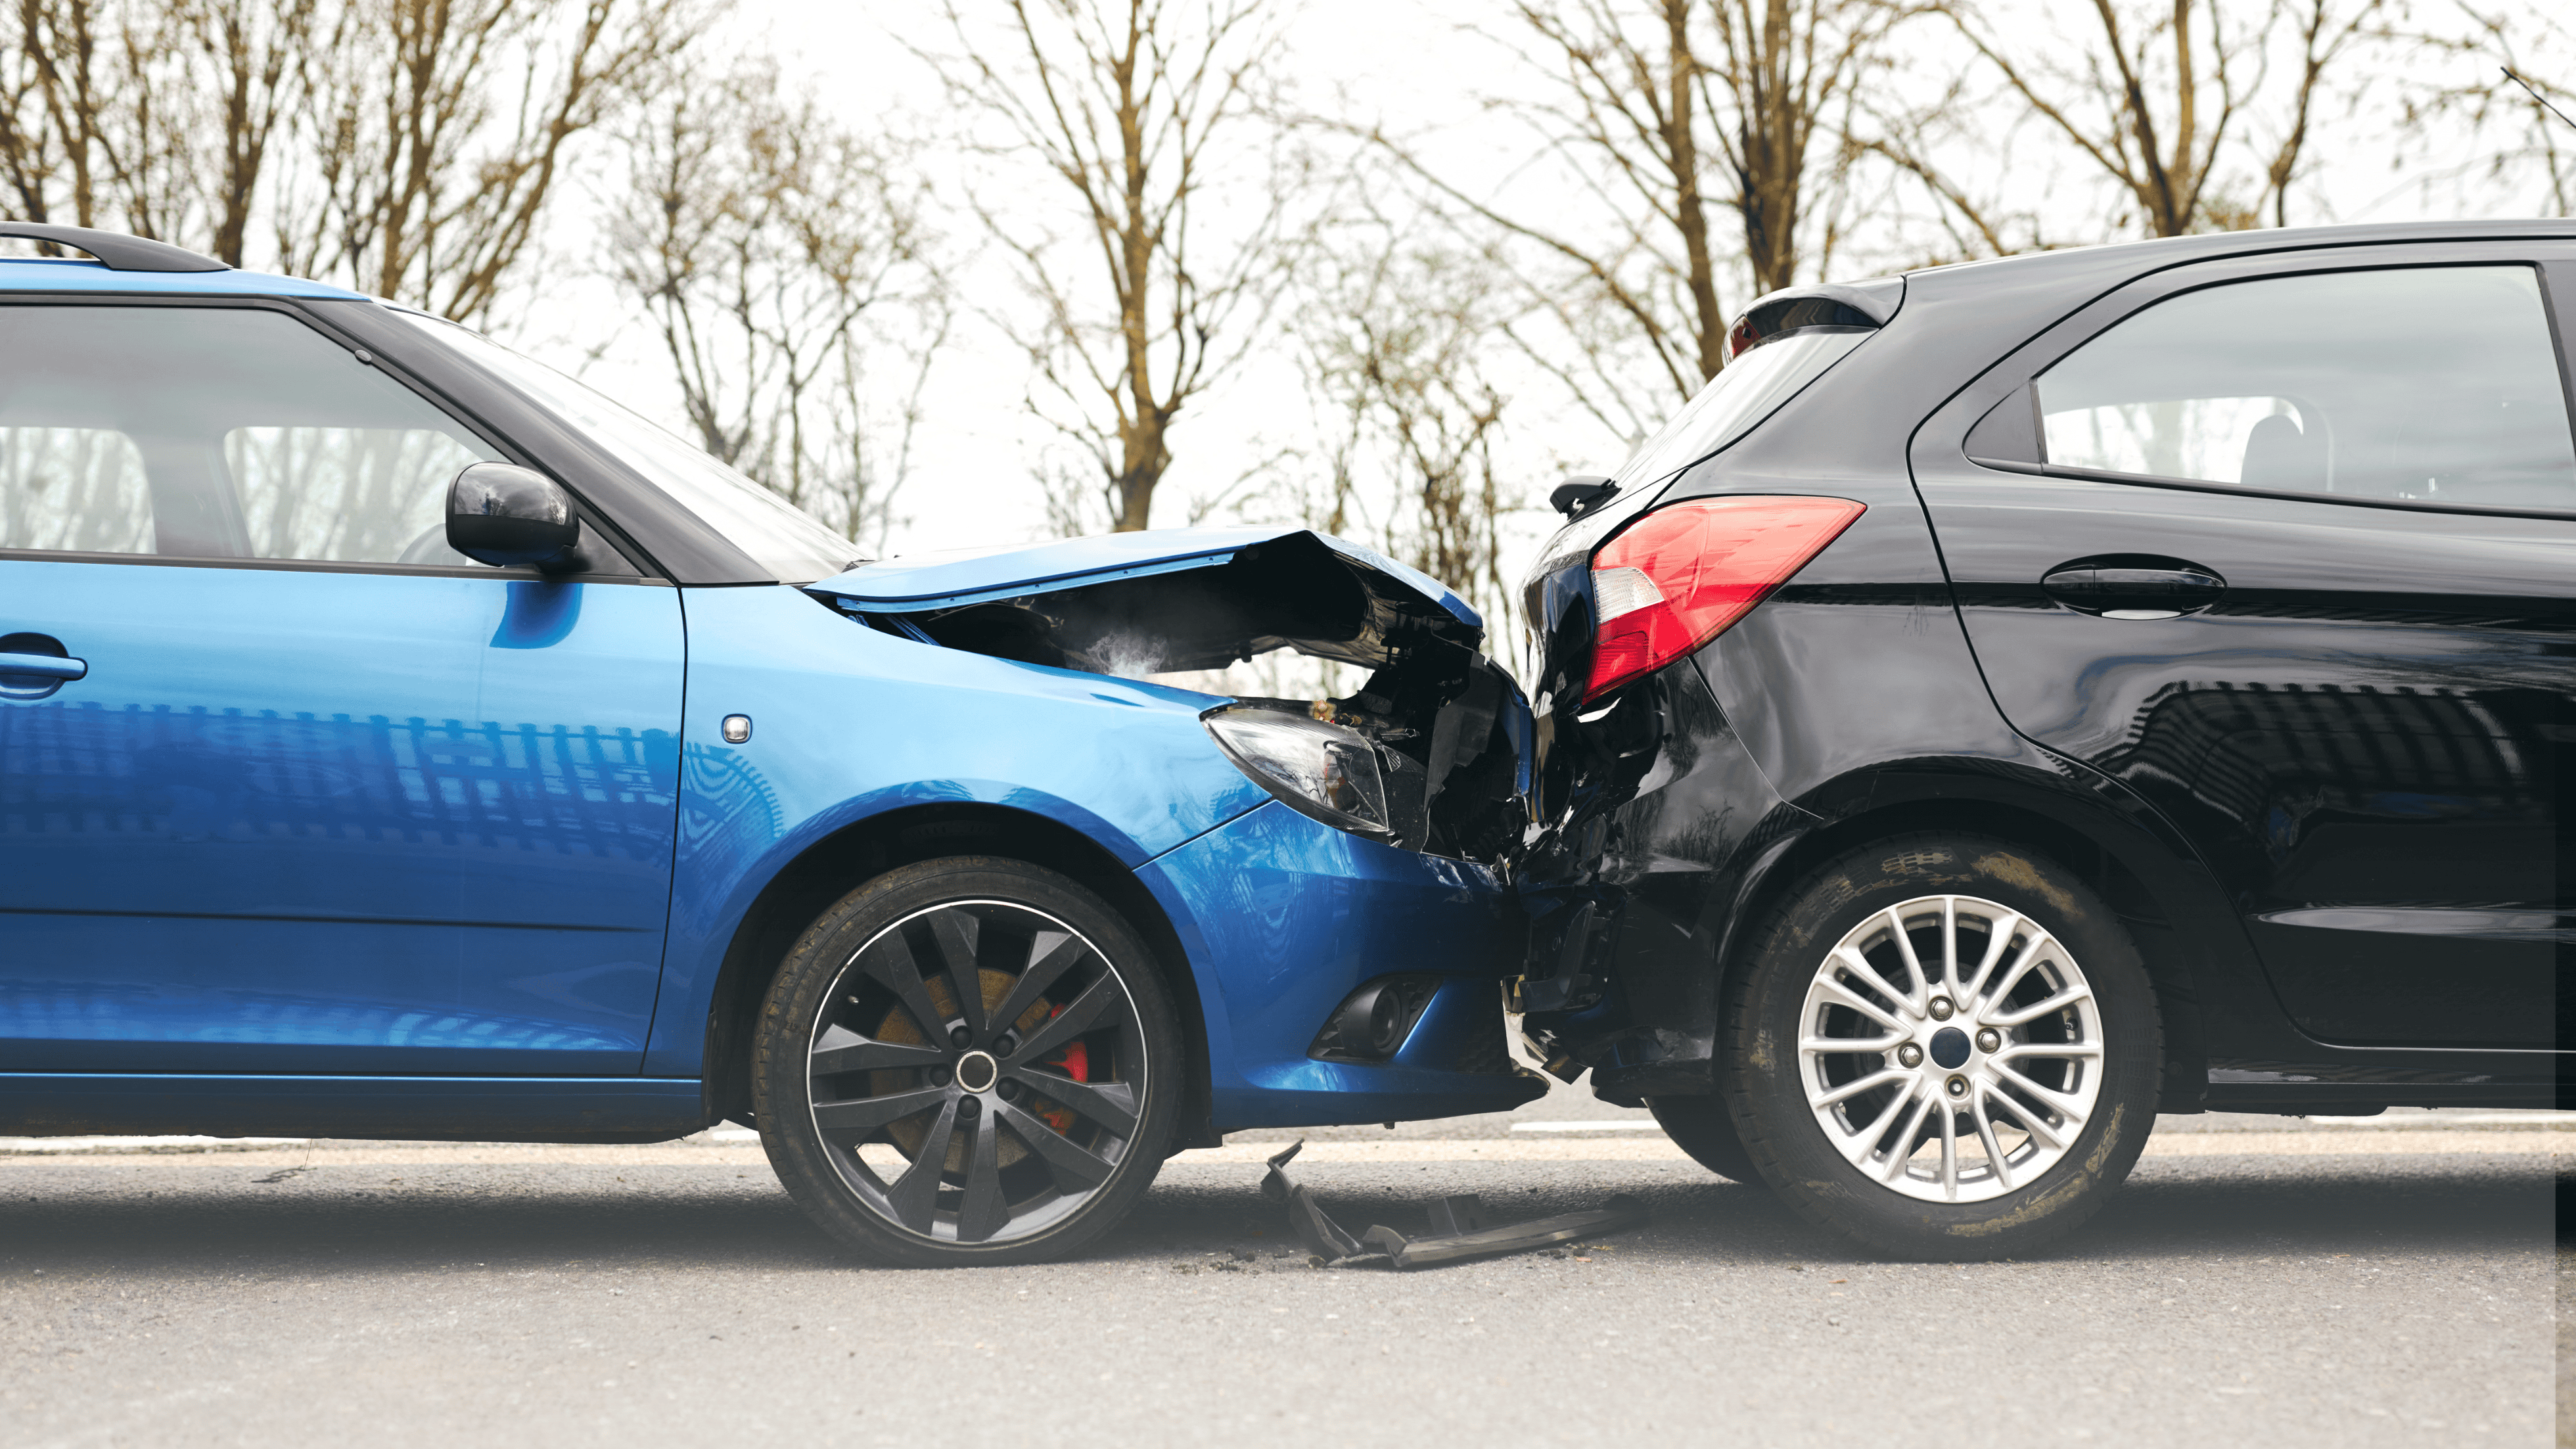 An image of two cars directly after a collision. A blue car rear-ended a black car, resulting in its hood being bent up.